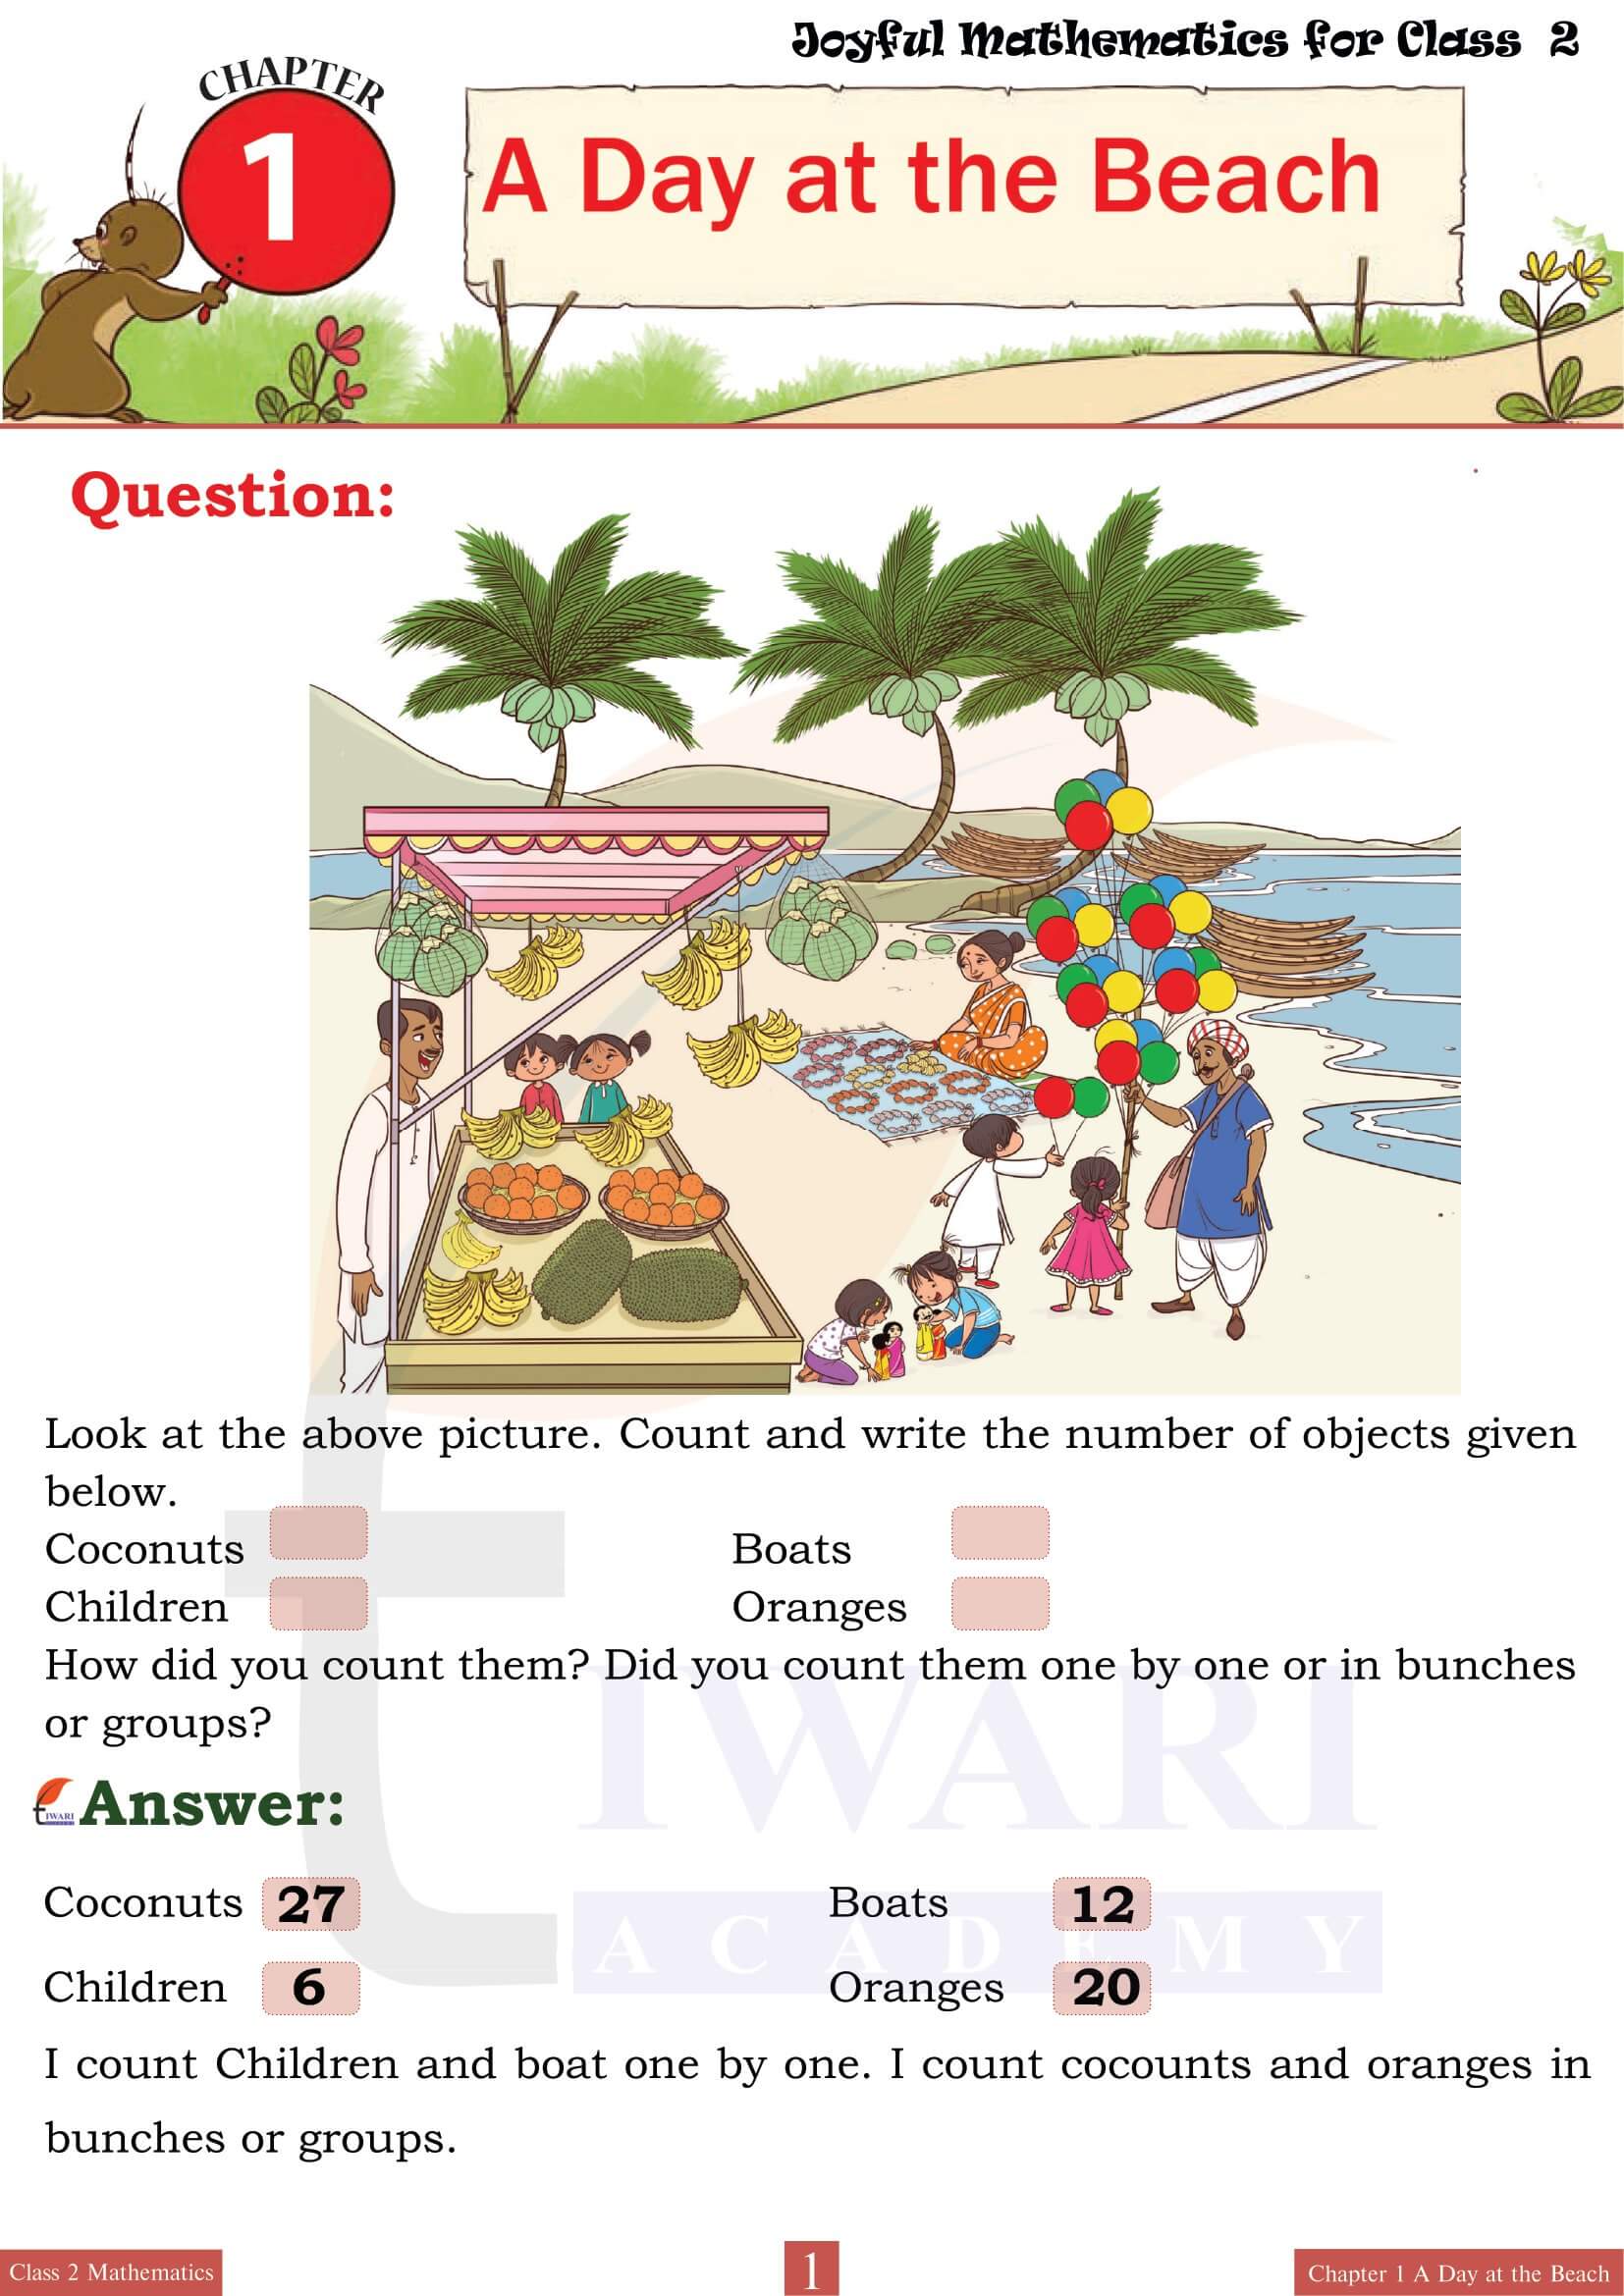 NCERT Solutions for Class 2 Maths Chapter 1 A Day at the Beach